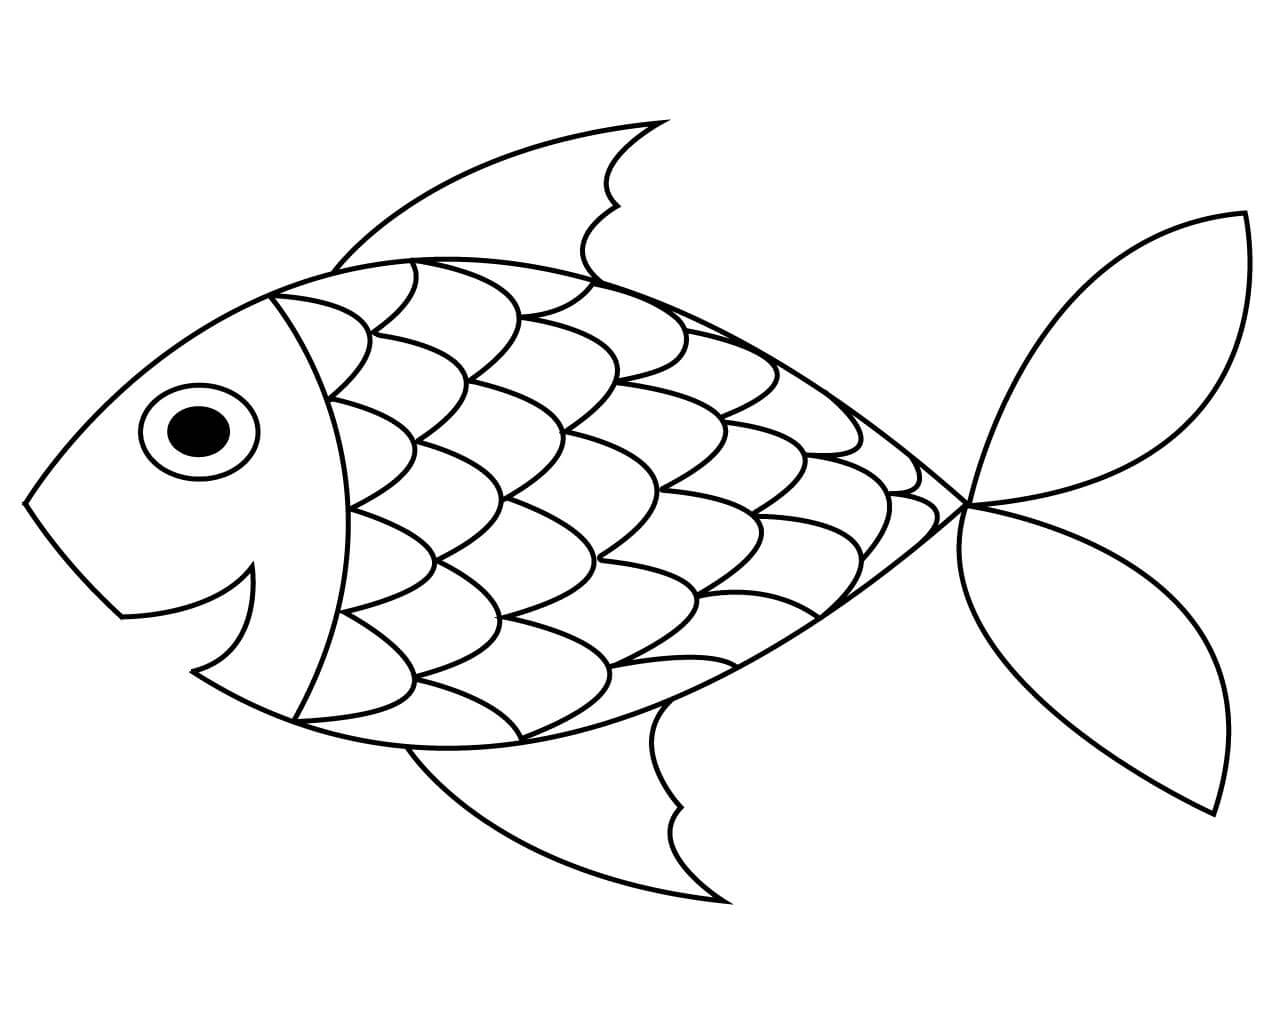 Fun Rainbow Fish coloring page - Download, Print or Color Online for Free